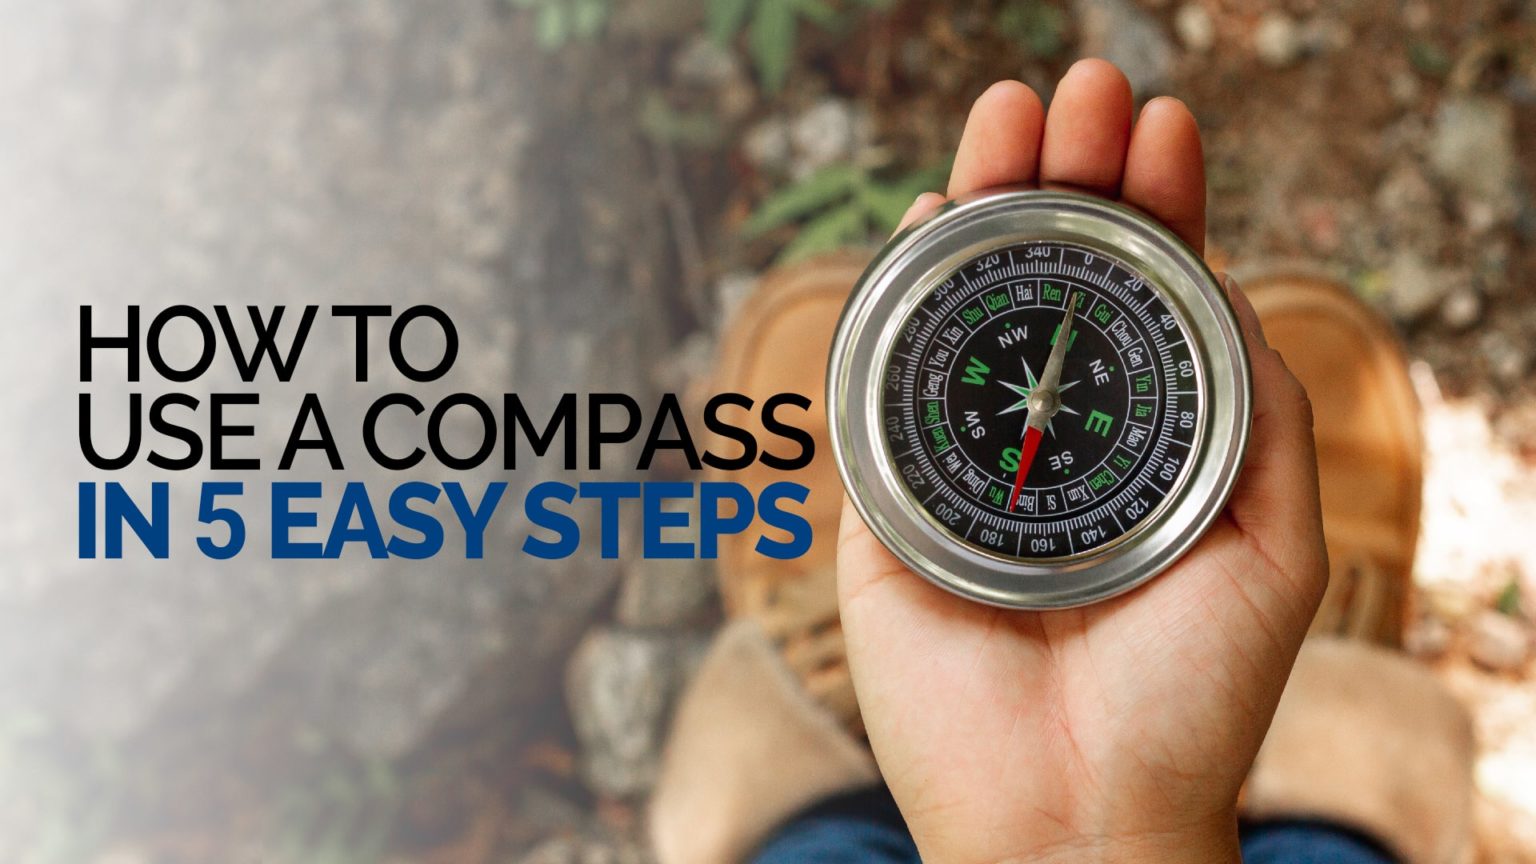 How to use a compass in 5 easy steps